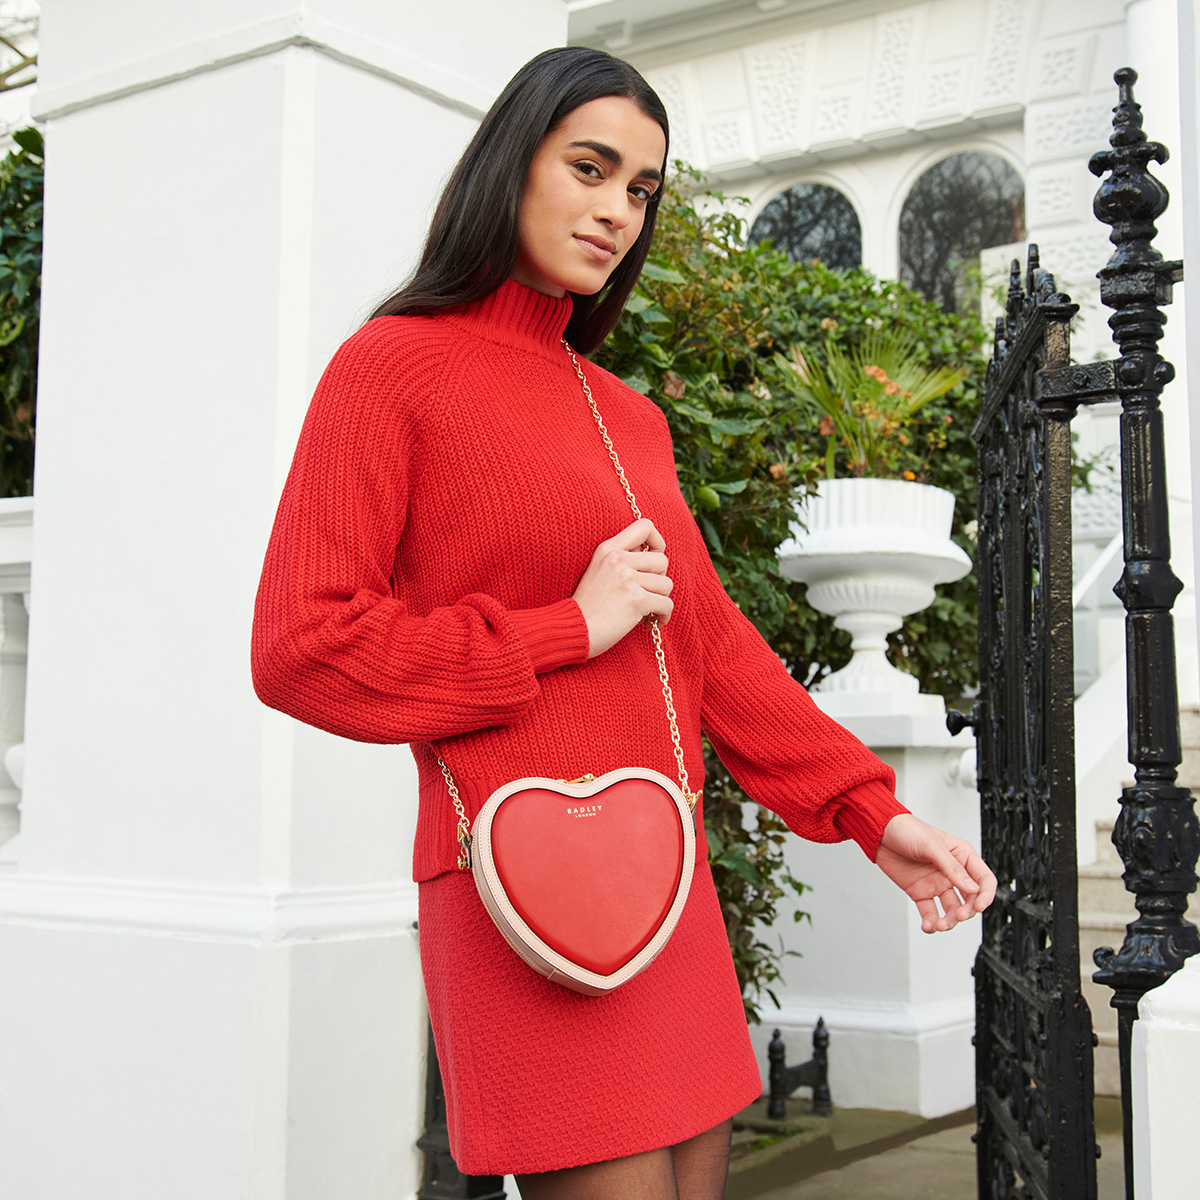 Shop Valentine's Day Collection